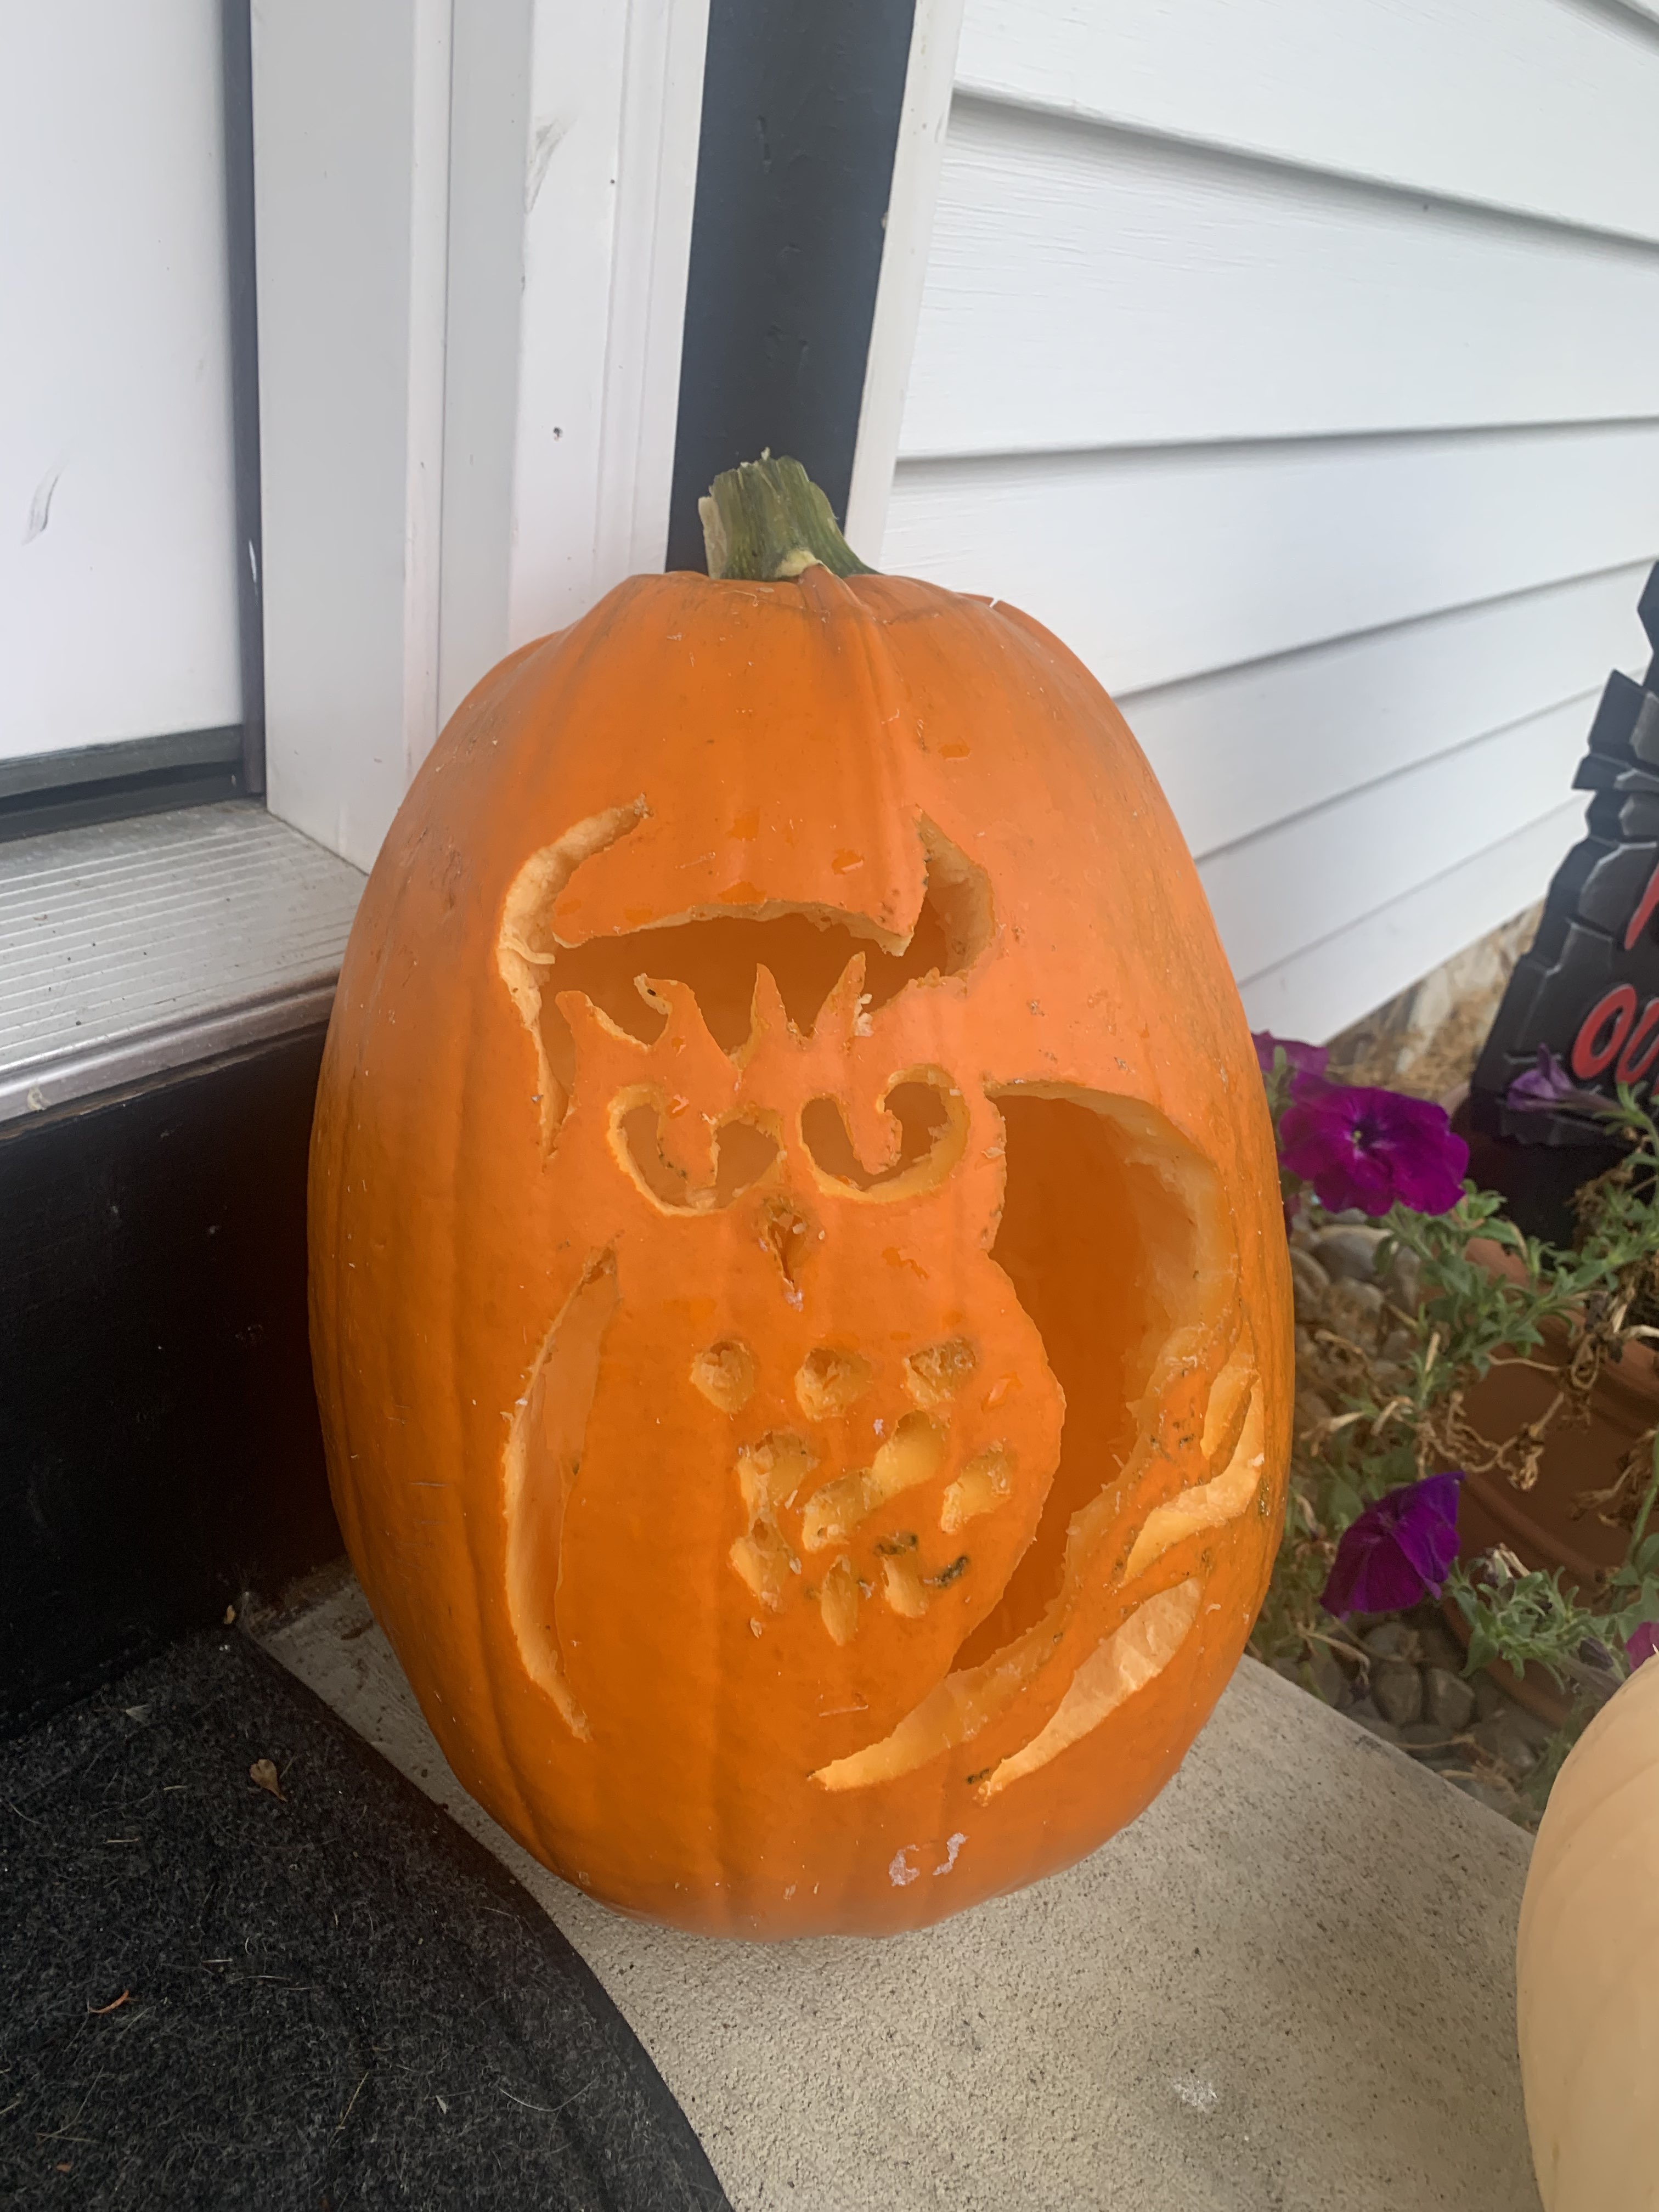 A jack-o-lantern with a owl carved into it